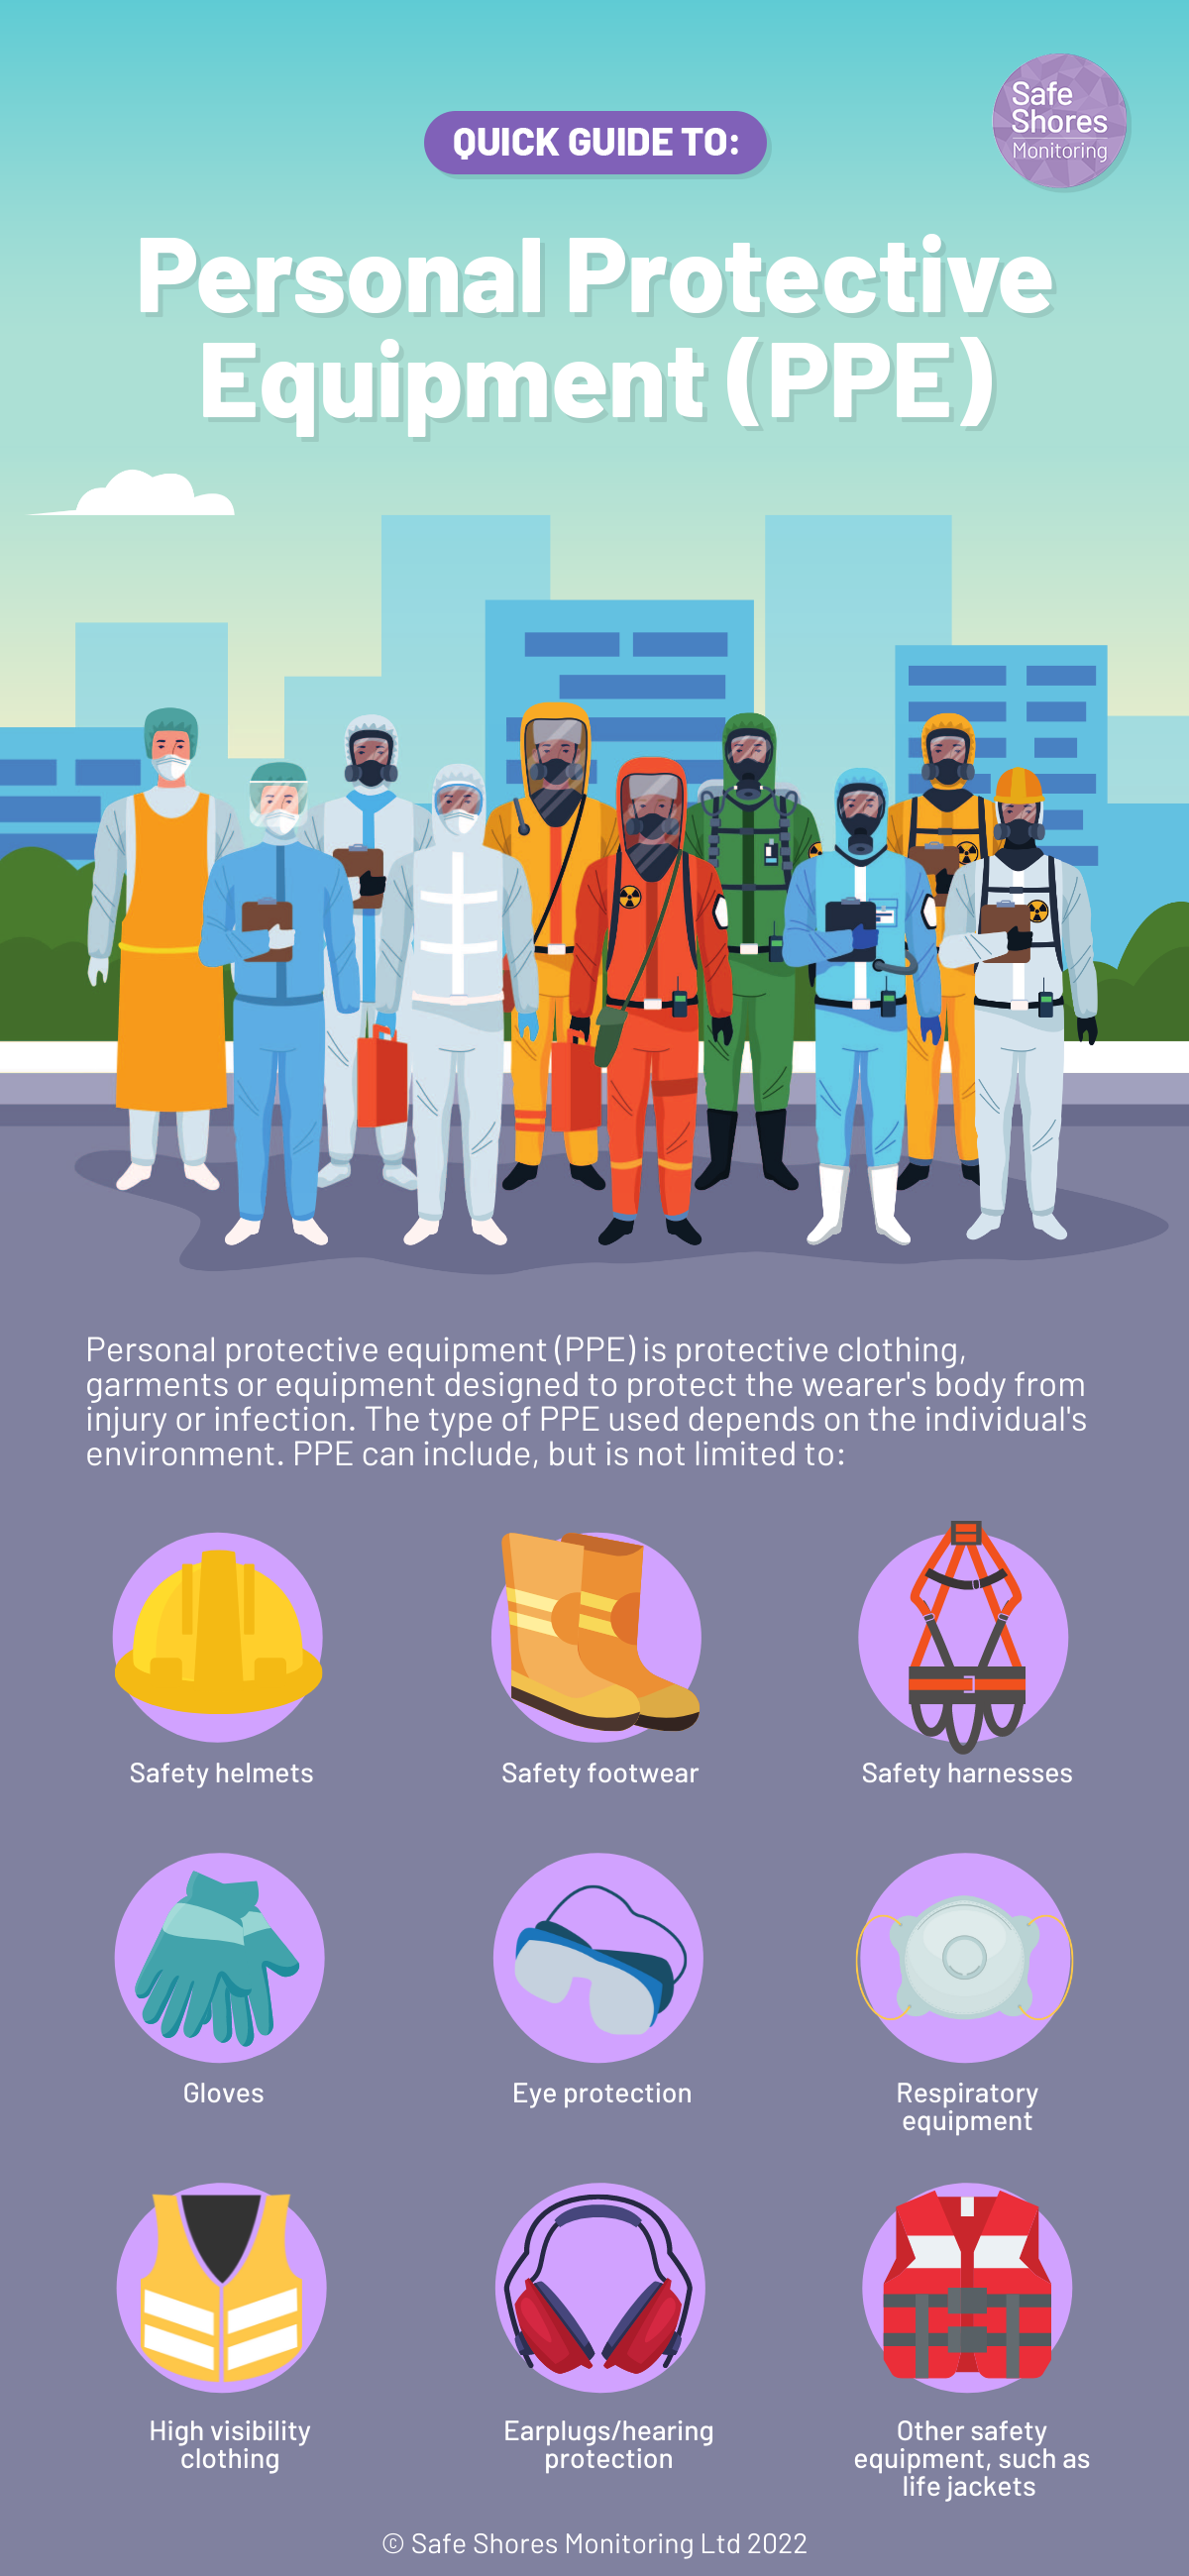 Infographic featuring different types of Personal Protective Equipment, including helmets, footwear, harnesses, gloves, eye protection etc.